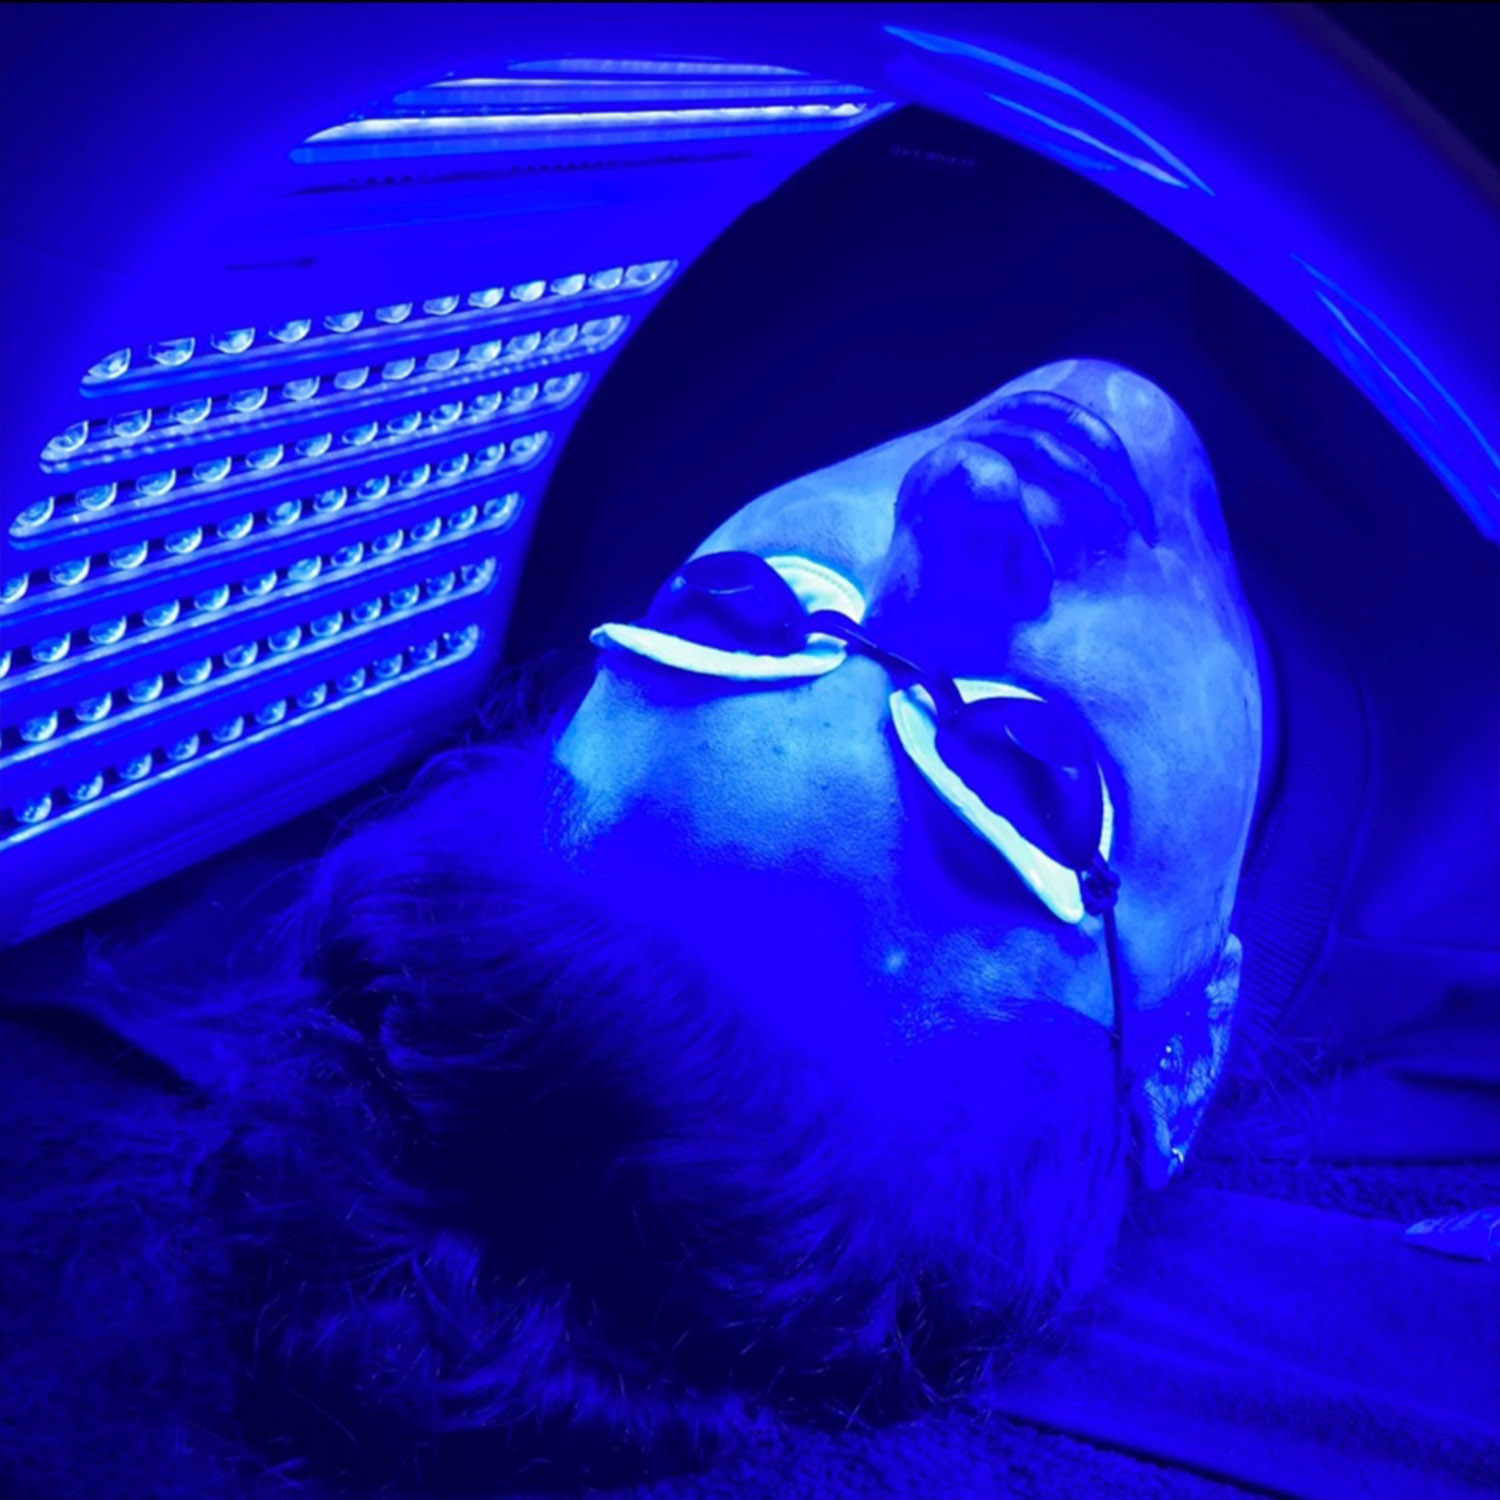 LED Light Therapy using modern equipment and technique at Rejuvenate Laser & Skin Clinic